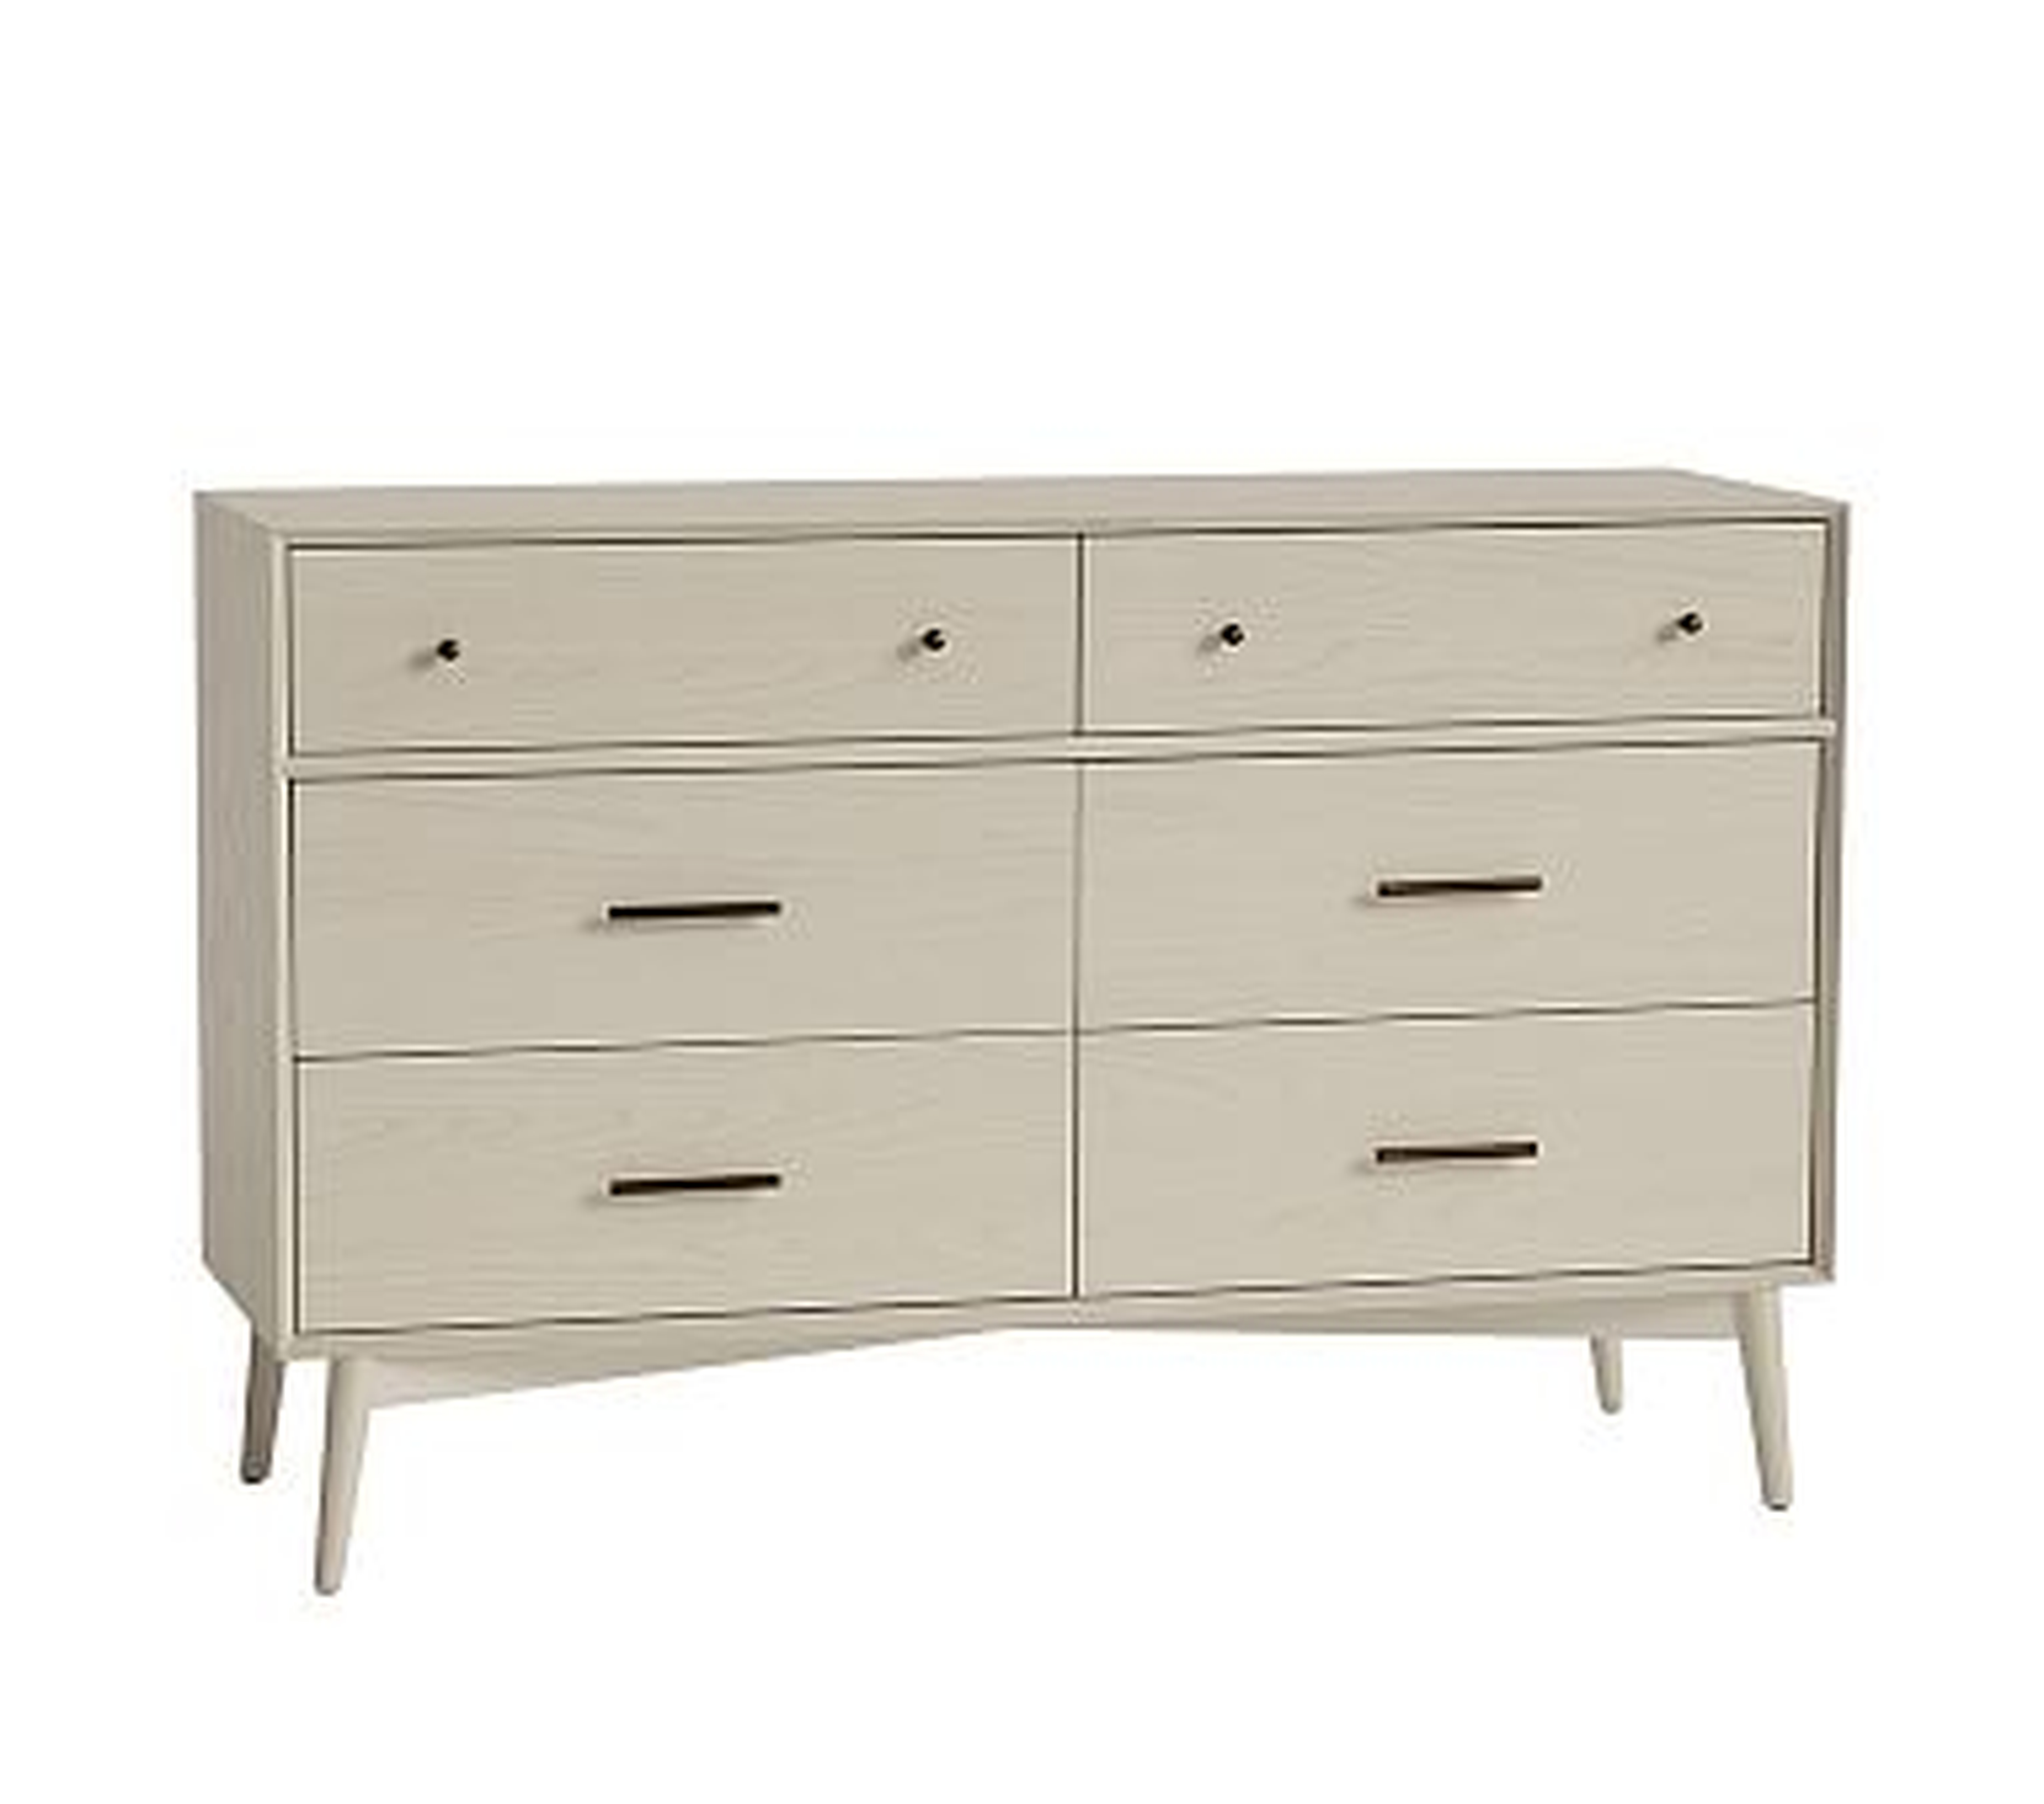 west elm x pbk Mid Century Extra Wide Dresser Only, Pebble, Flat Rate - Pottery Barn Kids